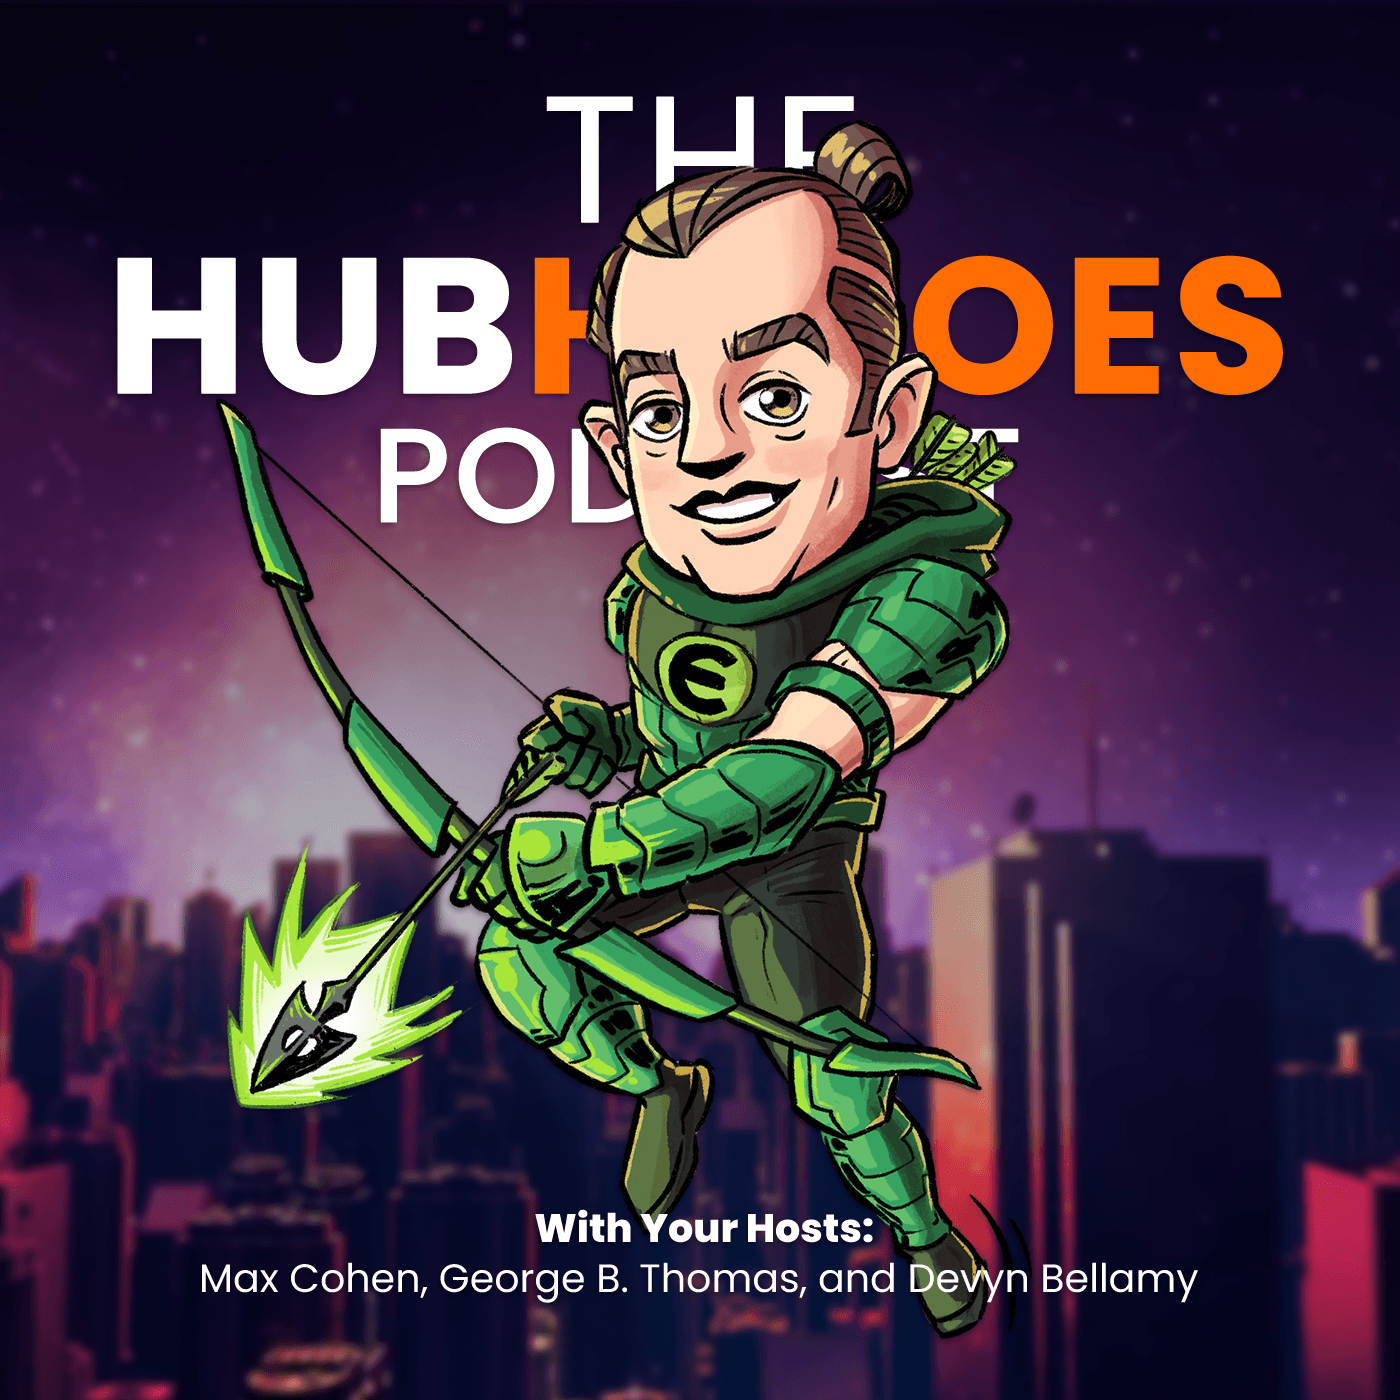 The HubHeroes Podcast - Eric